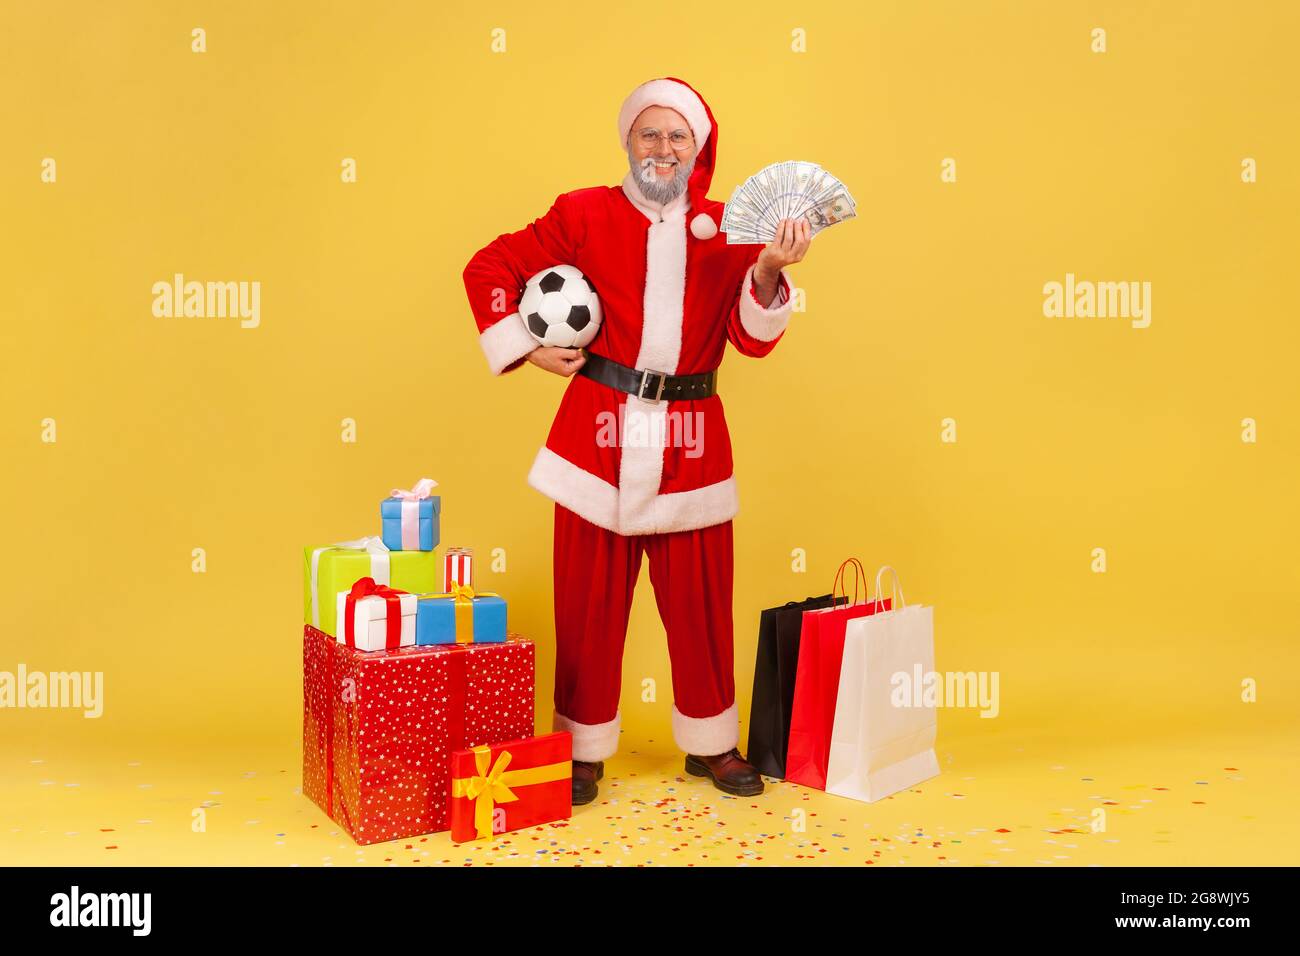 Happy satisfied elderly man wearing santa claus costume standing holding soccer ball and fan of money, betting and win, buy presents for Christmas. In Stock Photo